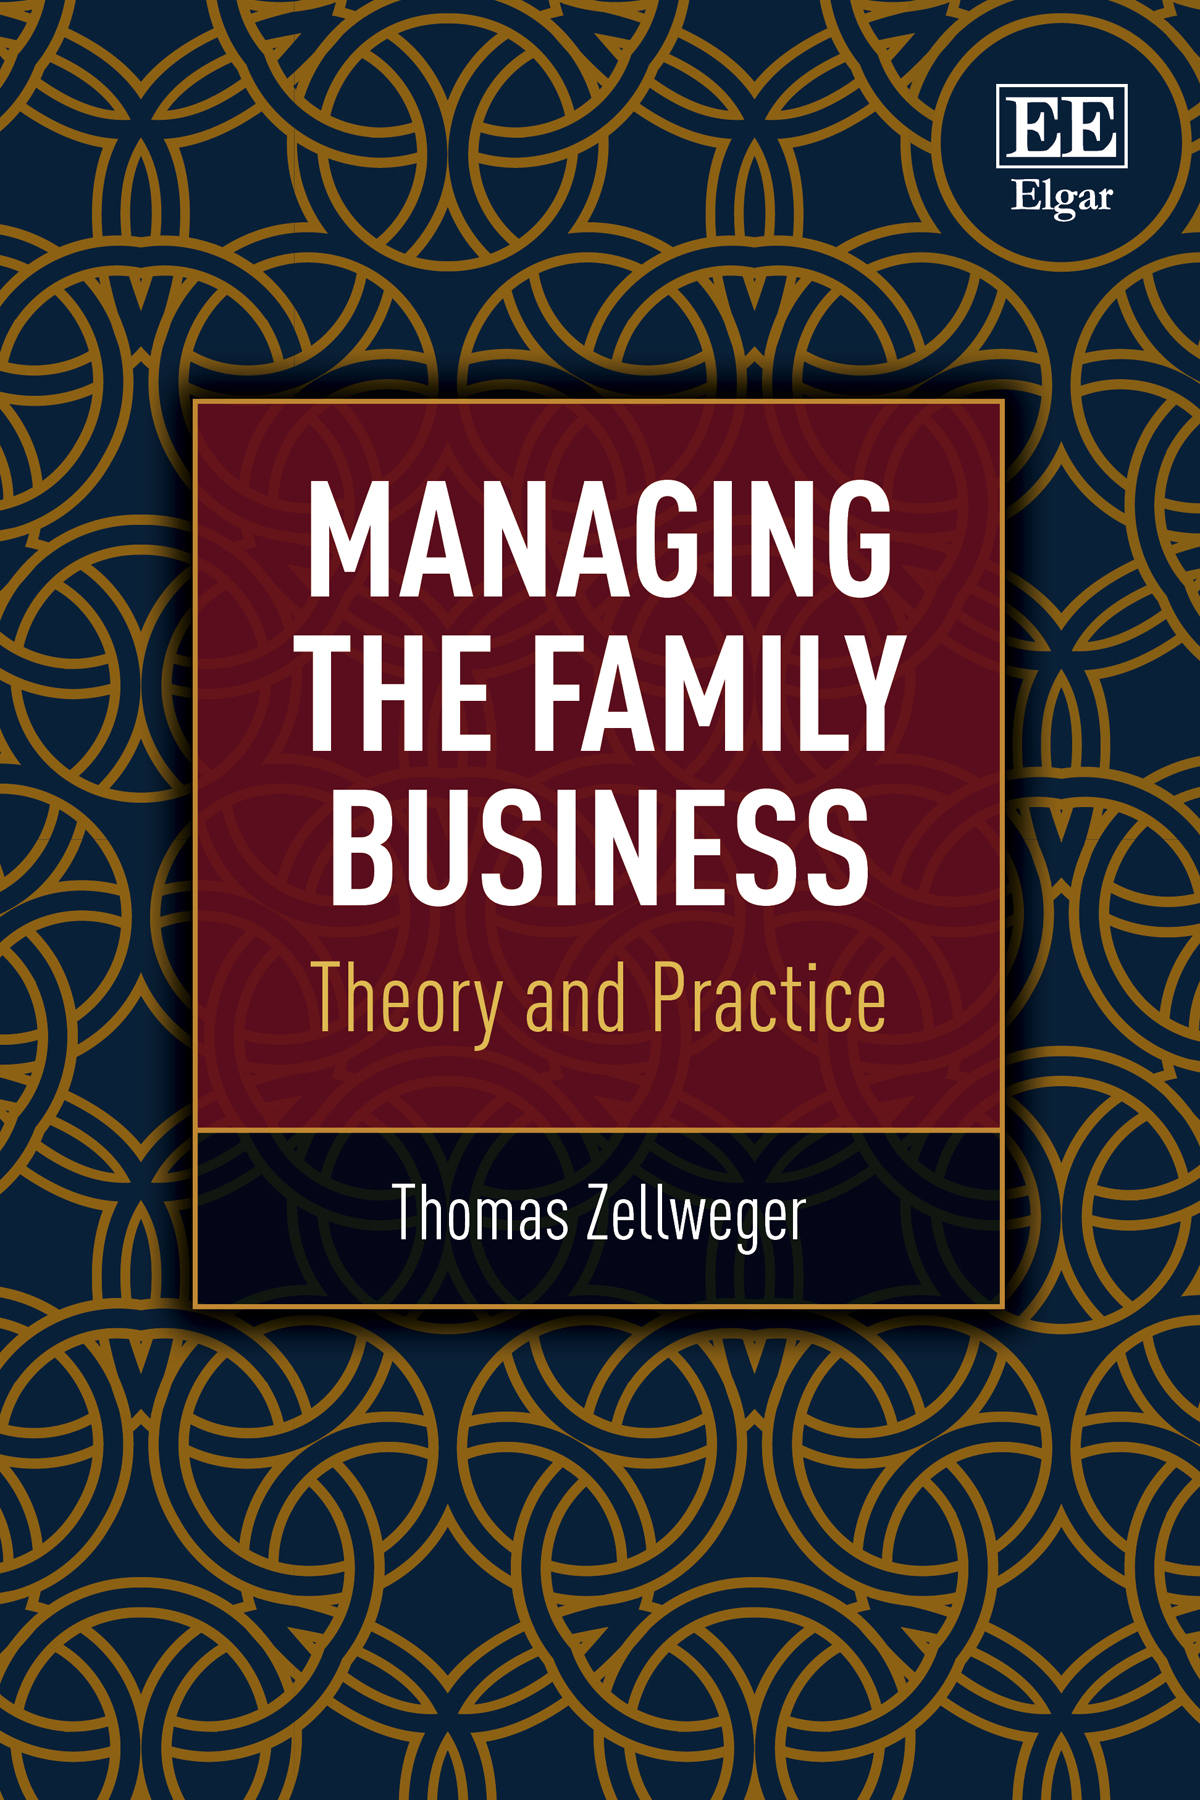 Managing the Family Business by Thomas Zellweger (ebook)